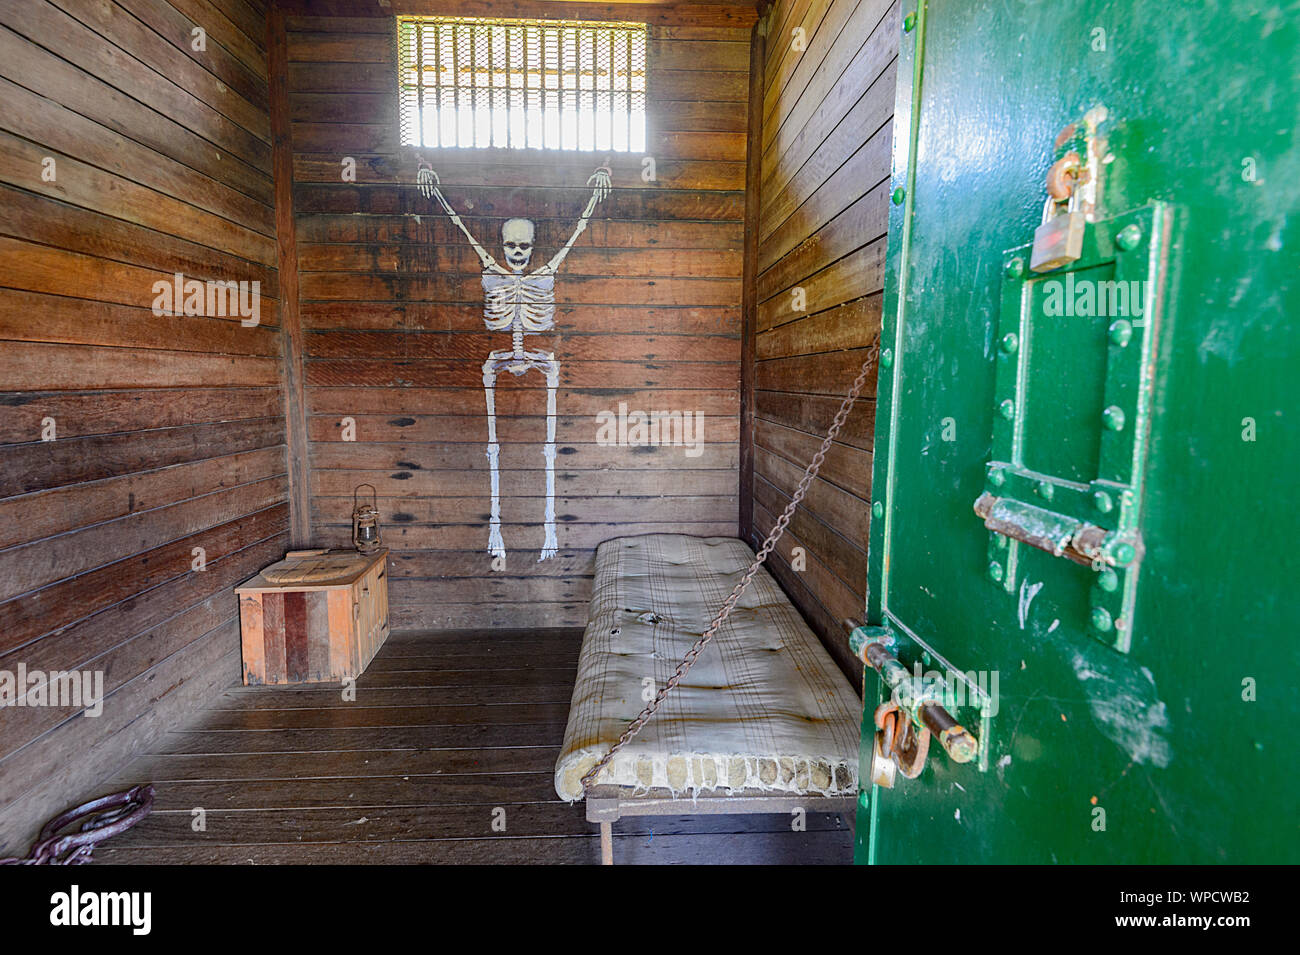 The Coomera lockup, used by police overnight, was brought to Beenleigh Historical Village and Museum in 1991, Queensland, QLD, Australia Stock Photo